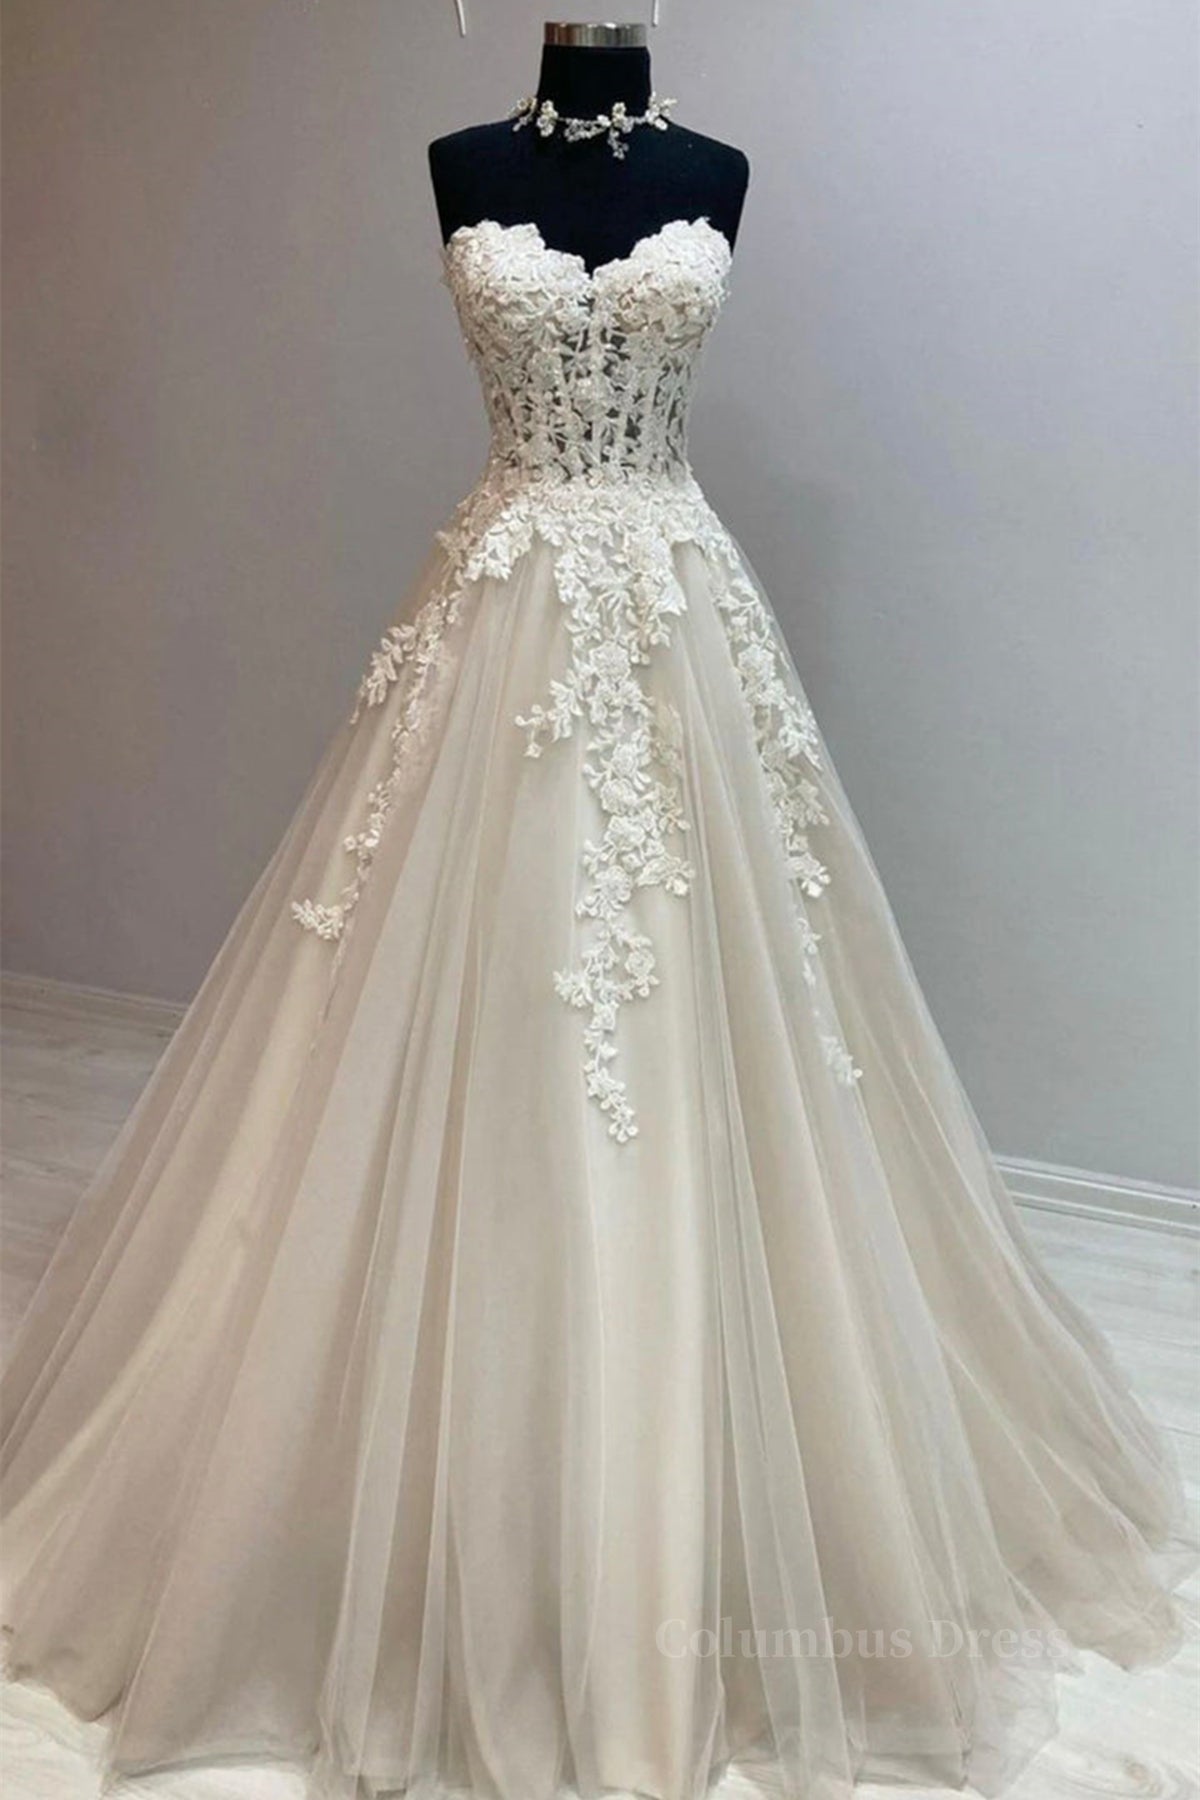 Formal Dresses Ballgown, Sweetheart Neck Champagne Tulle Lace Long Prom Dresses, Strapless Champagne Formal Dresses, Champagne Lace Evening Dresses